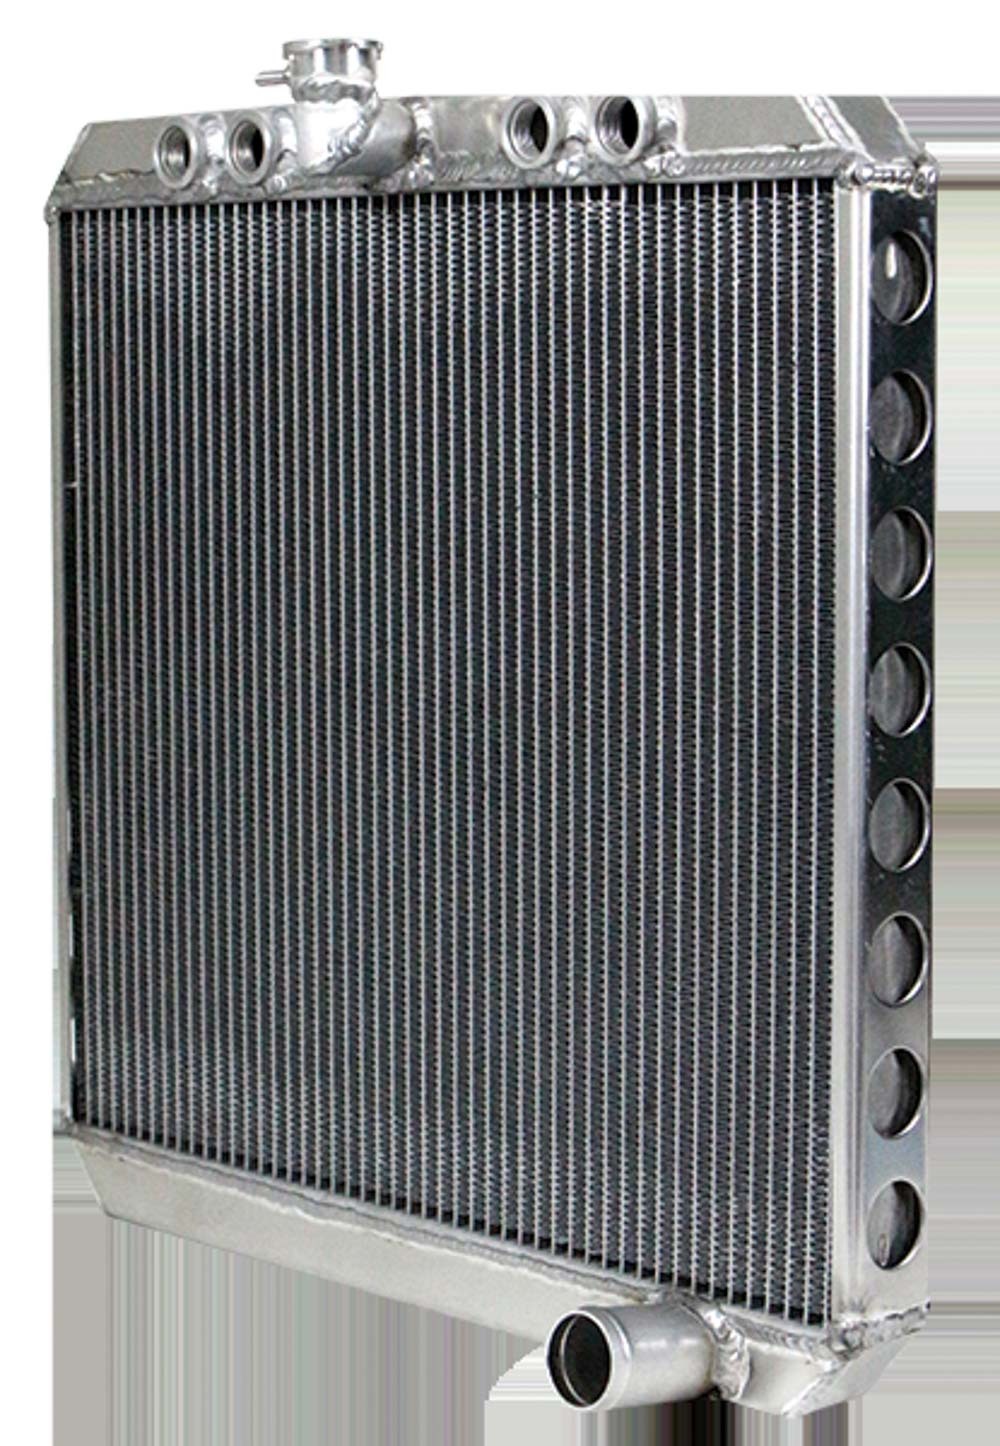 Northern 205161 Custom Hotrod 30s-40s Aluminum Downflow Radiator Right Outlet 